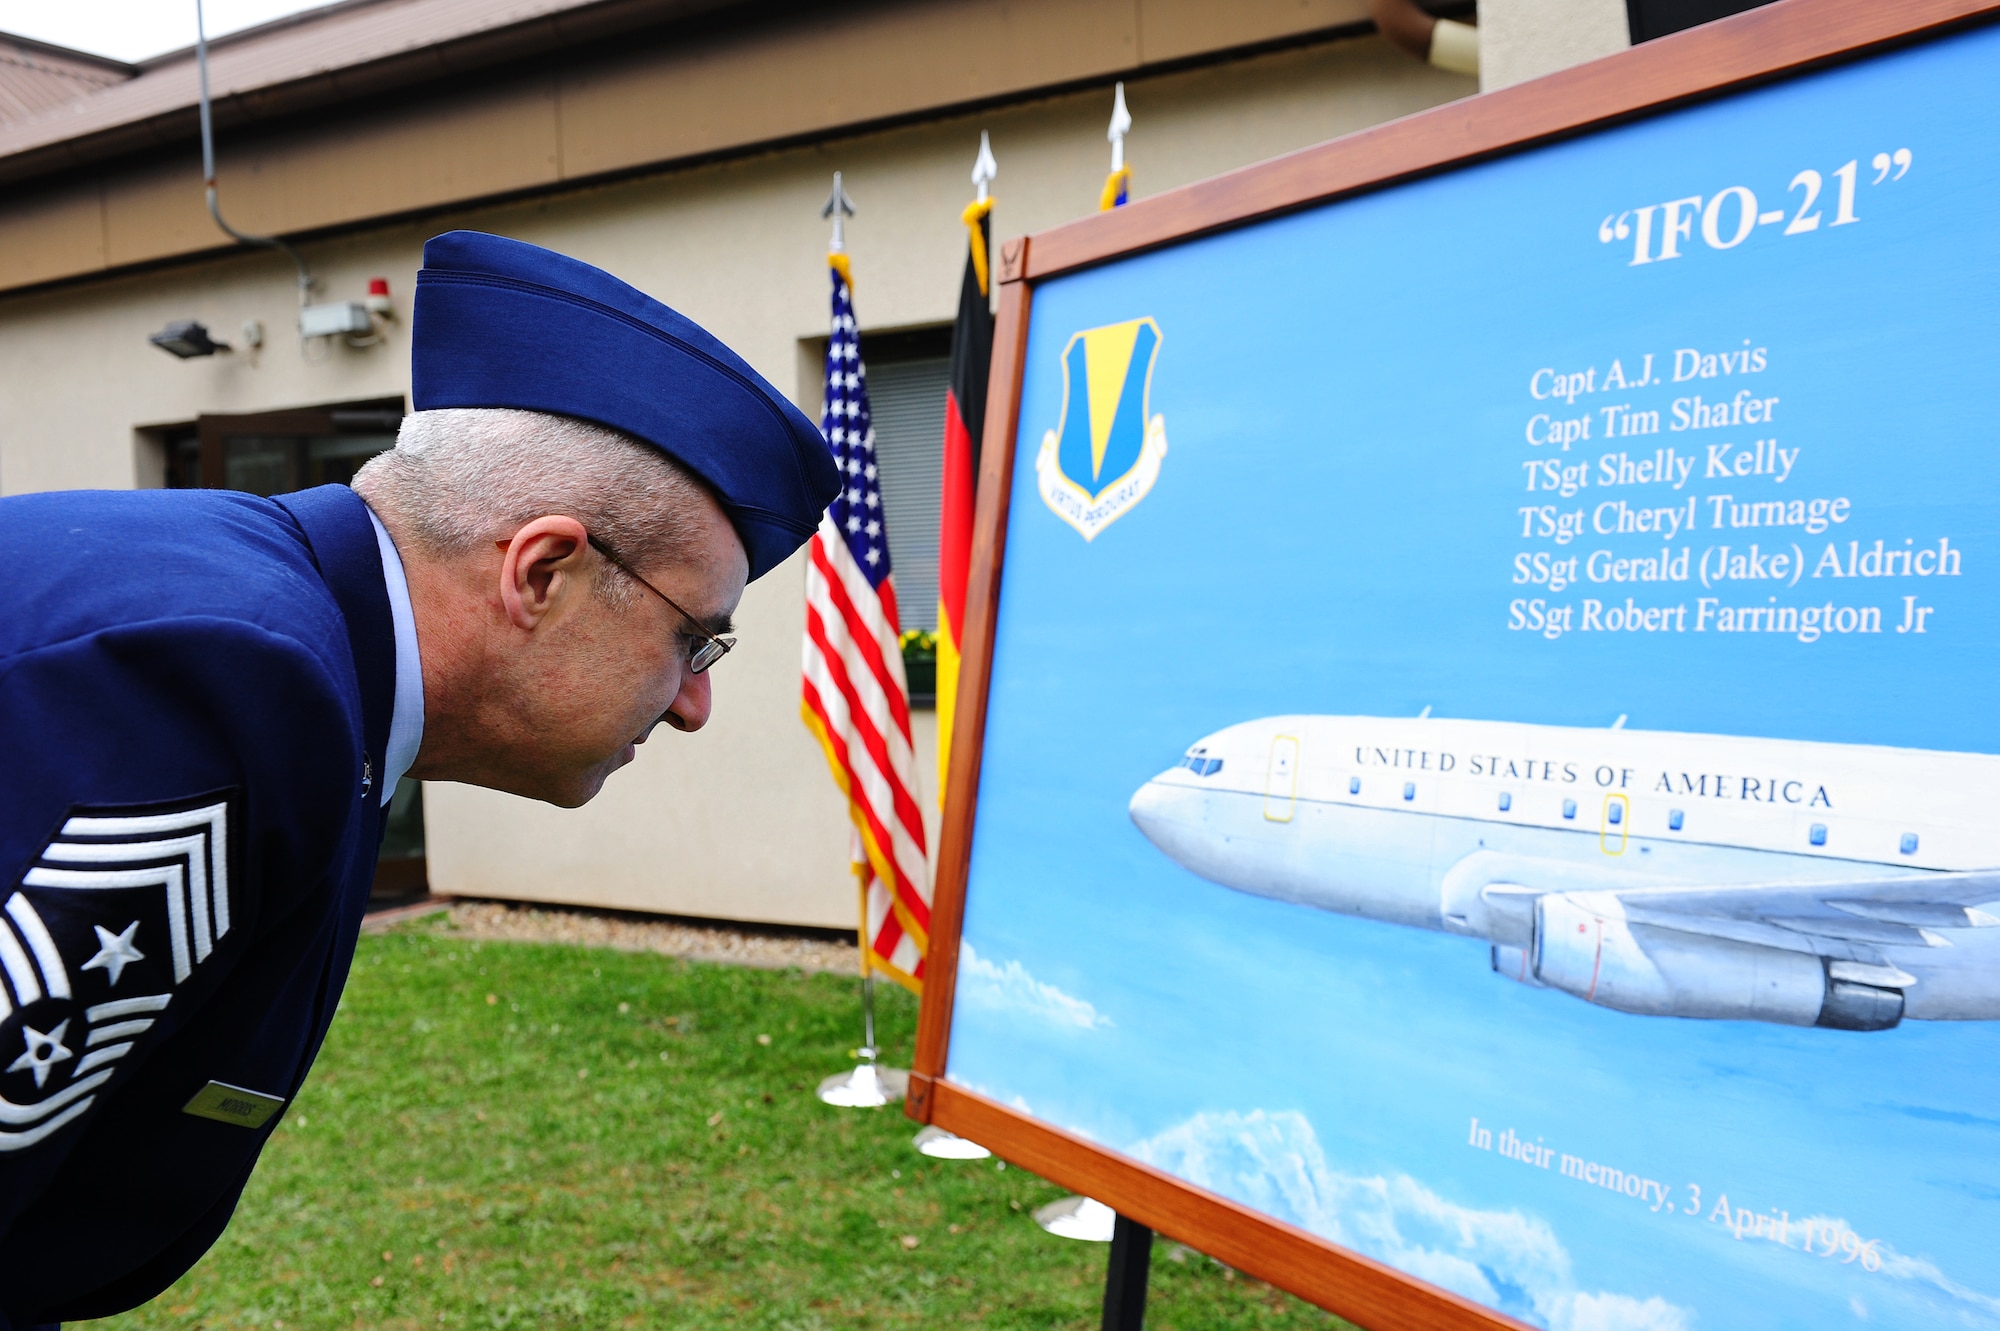 Chief Master Sgt. James Morris, 86th Airlift Wing command chief, takes a closer look at a painting during a memorial ceremony on Ramstein Air Base, April 5, 2012. The portrait was provided by Senior Master Sgt. Mel Sylvester (ret.) and Master Sgt. Mike Bulko (ret.) in honor of the members on flight IFO-21. On April 3, 1996, a CT-43 aircraft that was assigned to the 76th Airlift Squadron crashed outside of Dubrovnik Croatia during a peacekeeping mission. This year marked the 16th anniversary. (U.S. Air Force photo by Amn Brea Miller)